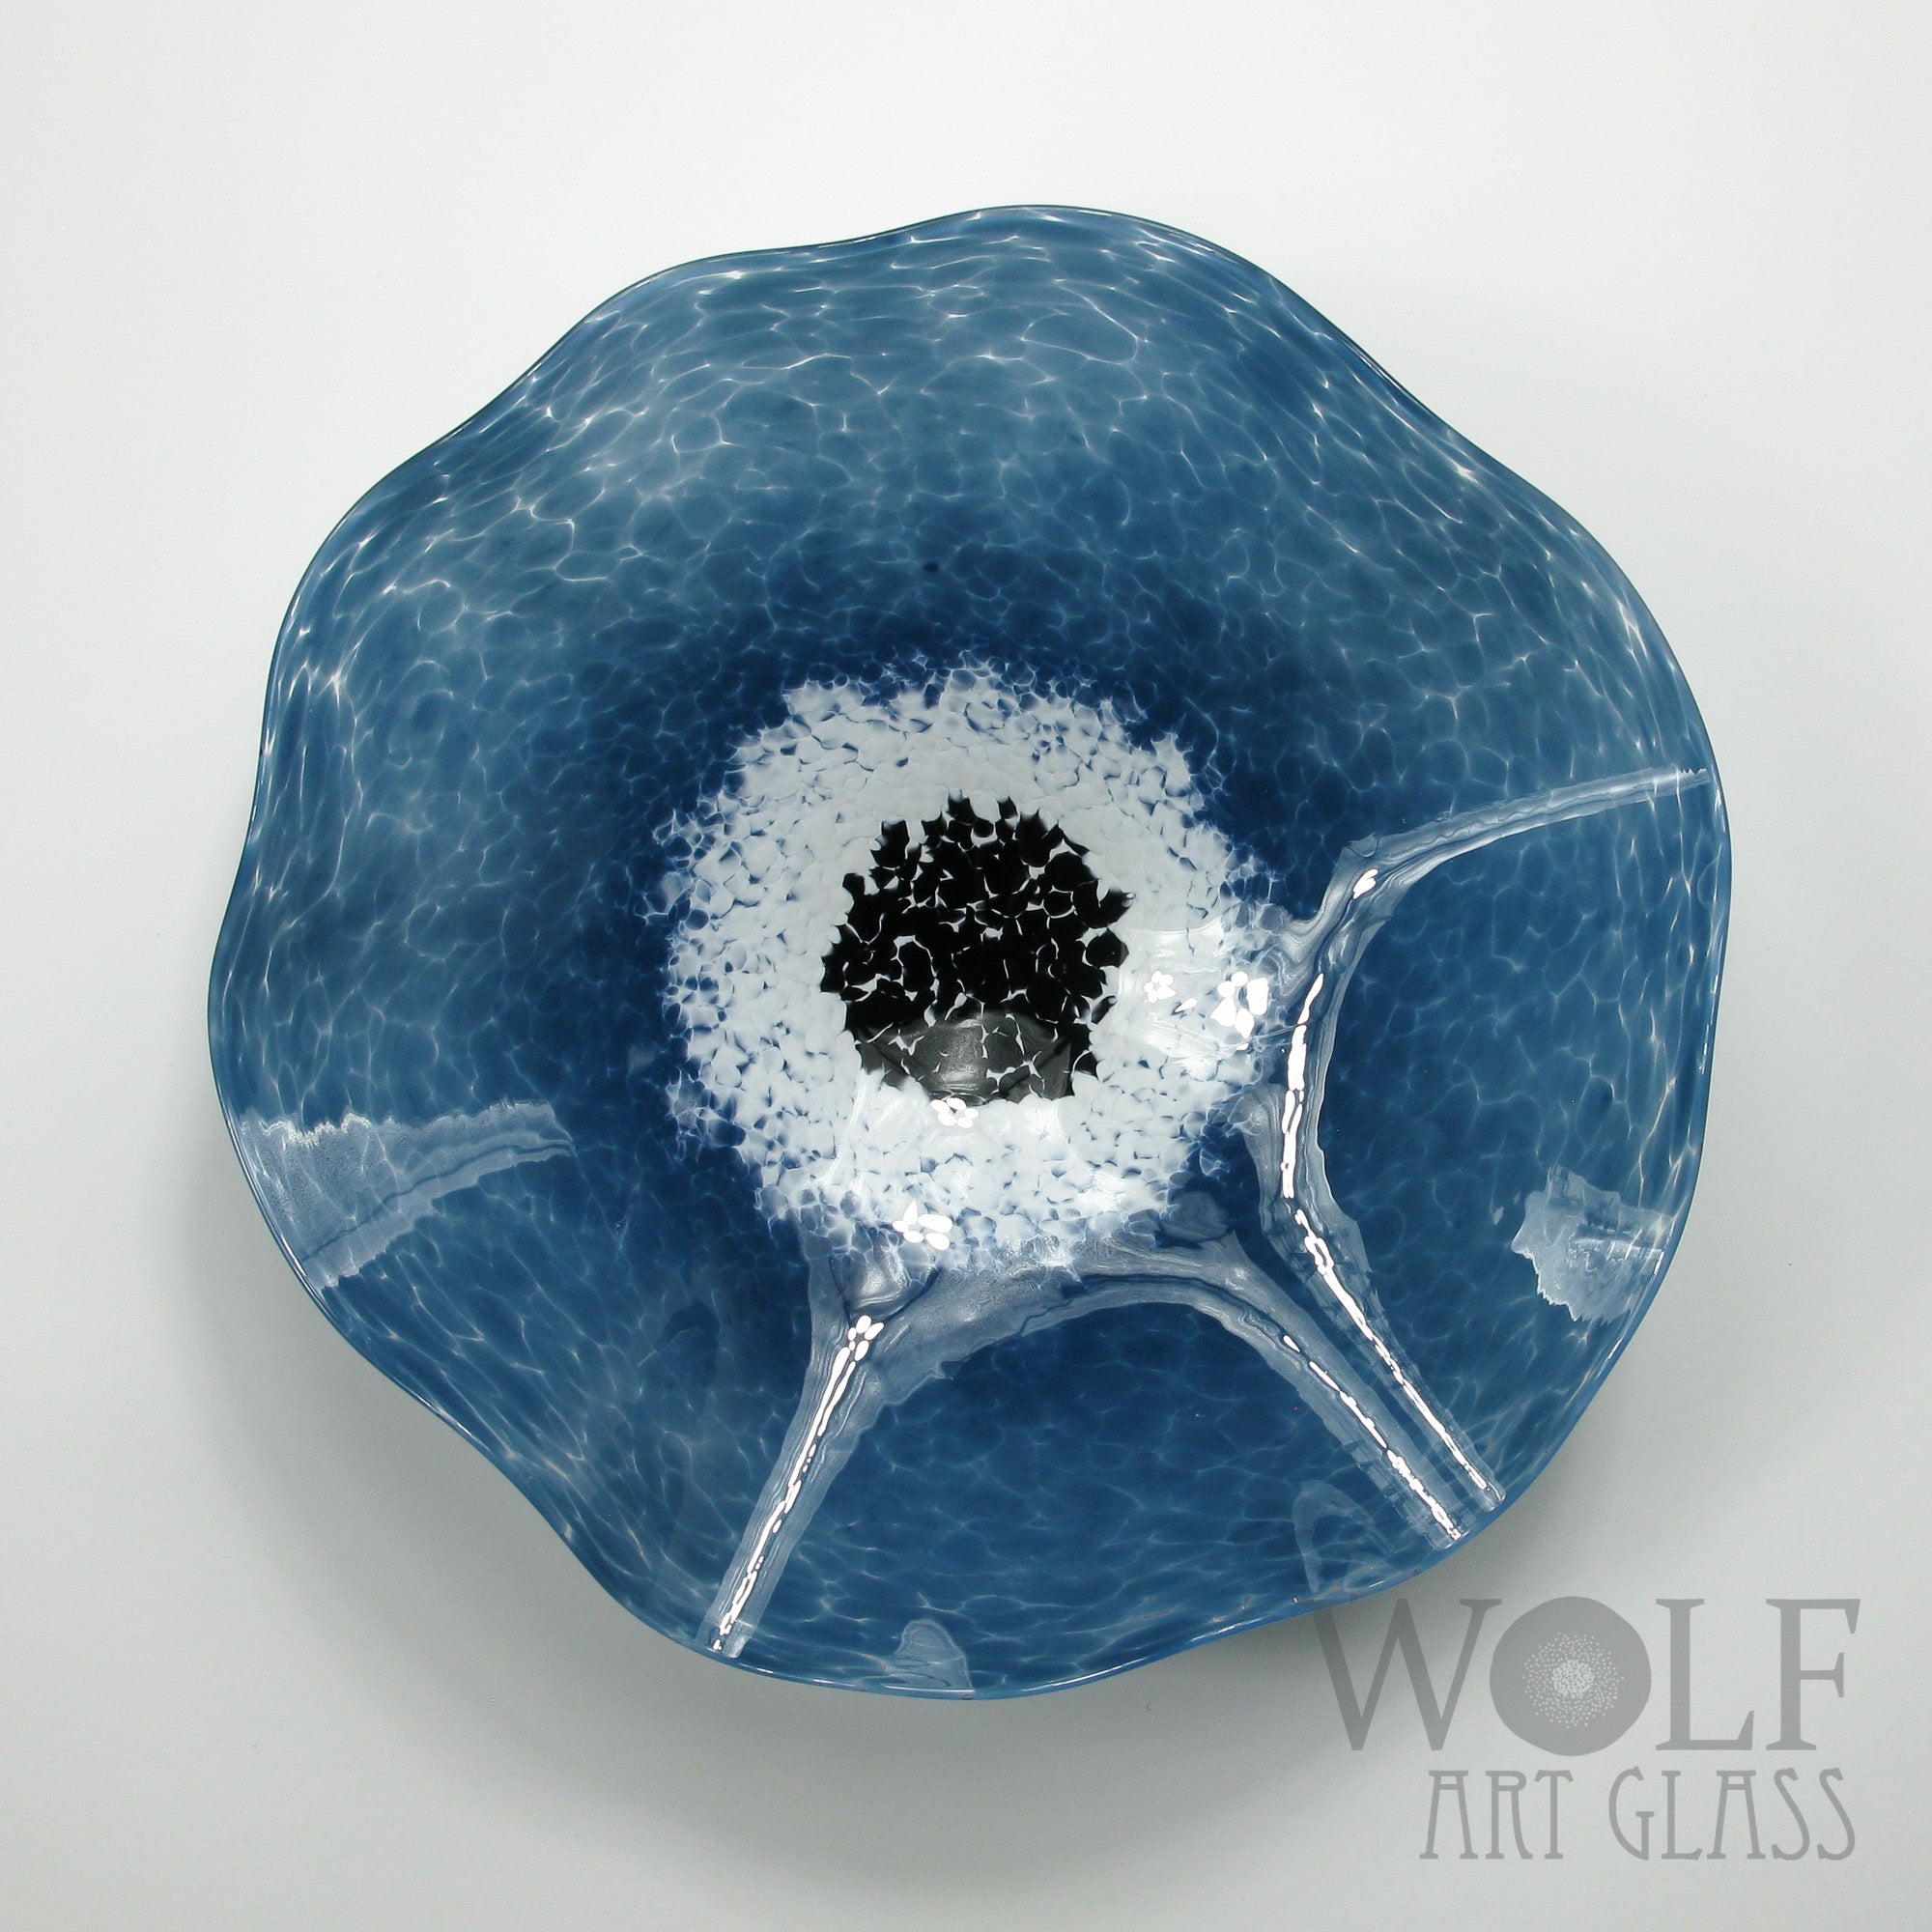 Olive Green, Denim Blue and White Blown Glass Wall Art Poppy Flower Wall Decor Collection Installation